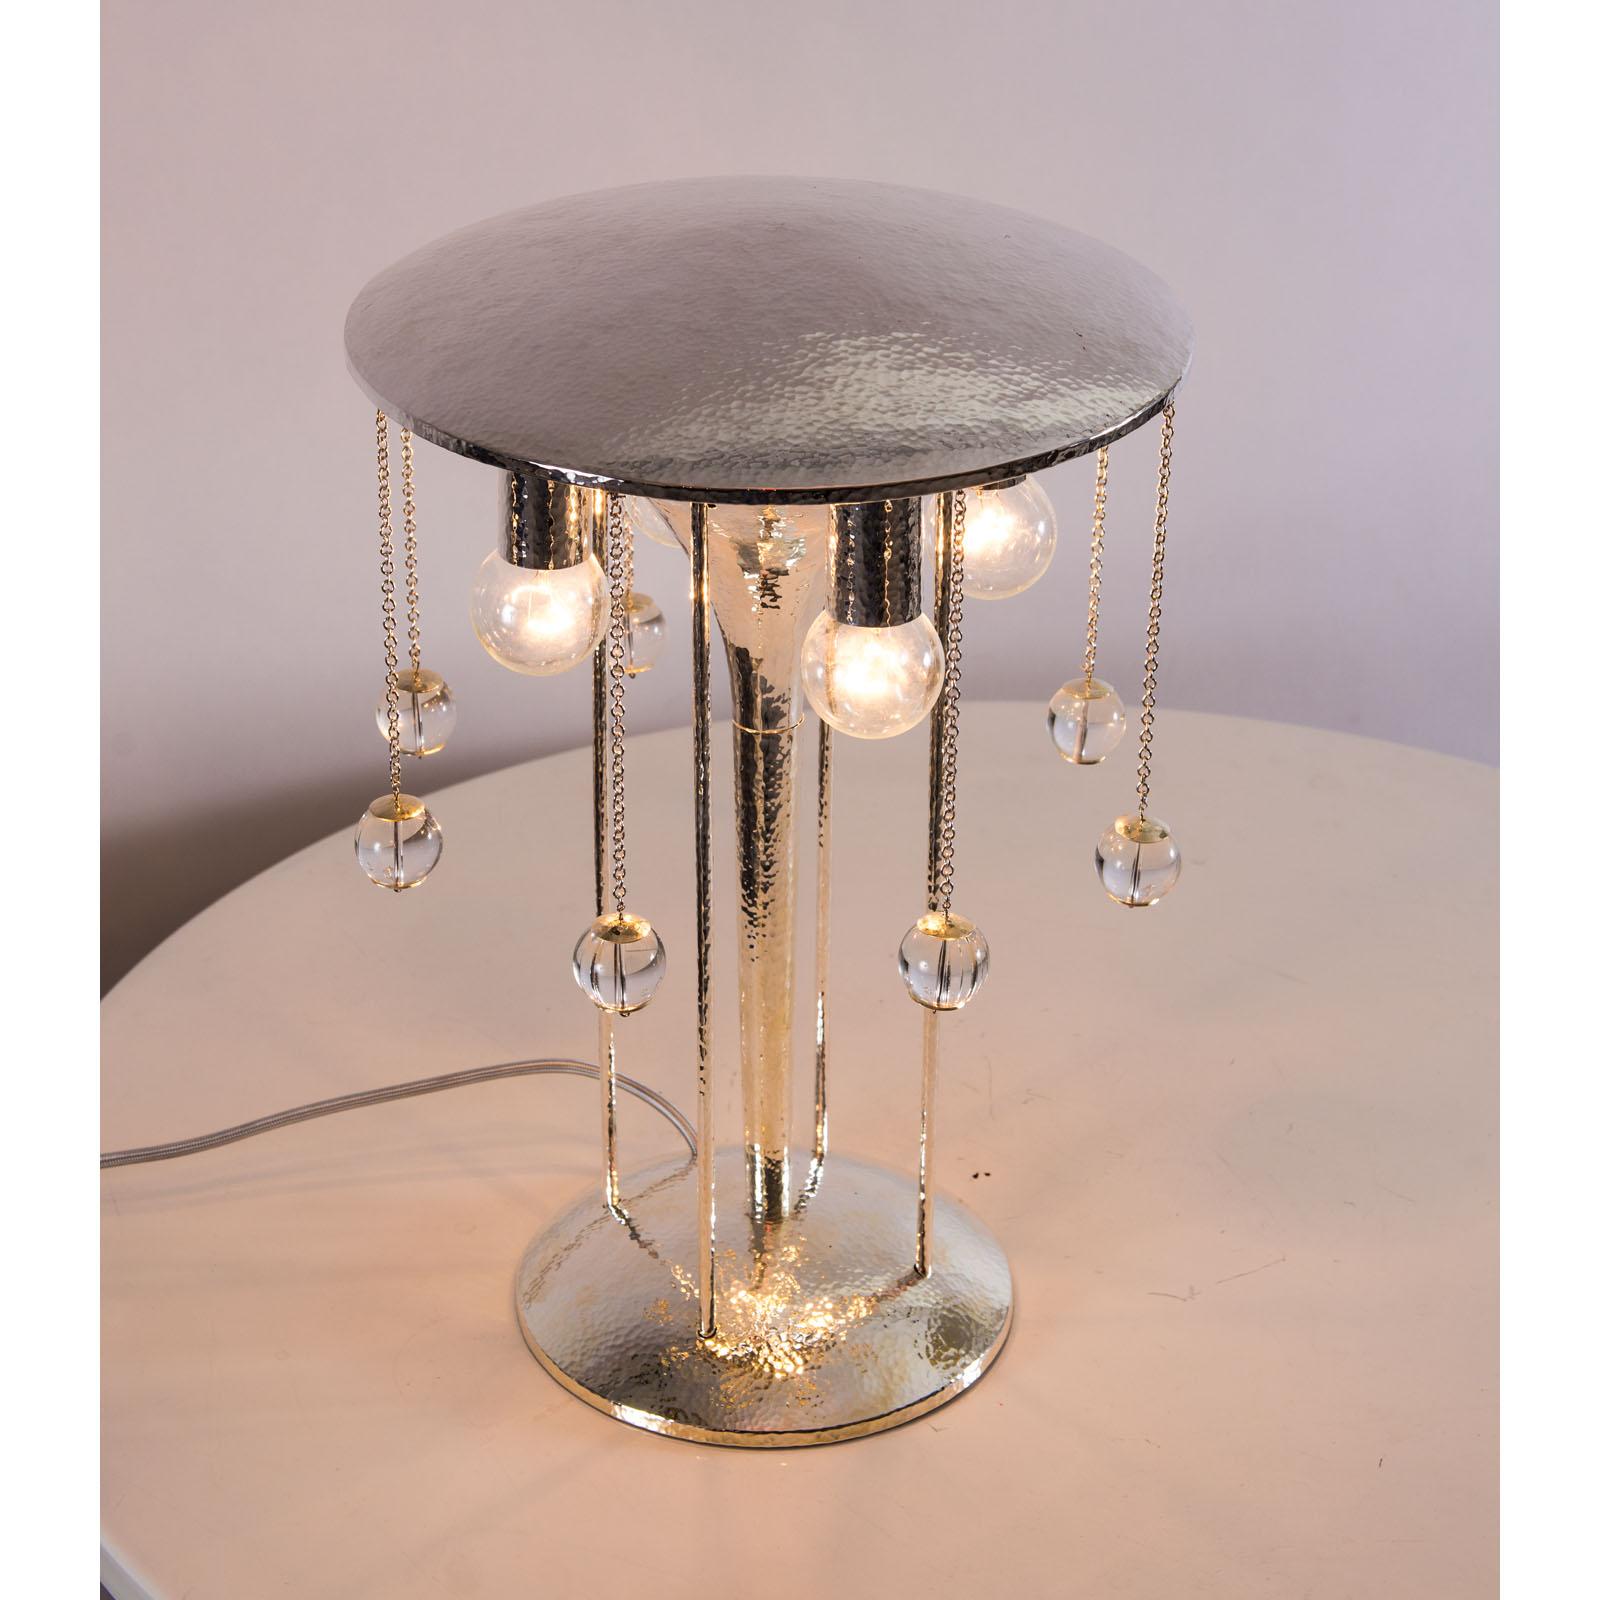 Contemporary Secessionist J. Hoffmann&Wiener Werkstätte Silvered Brass Table Lamp Re-Edition For Sale